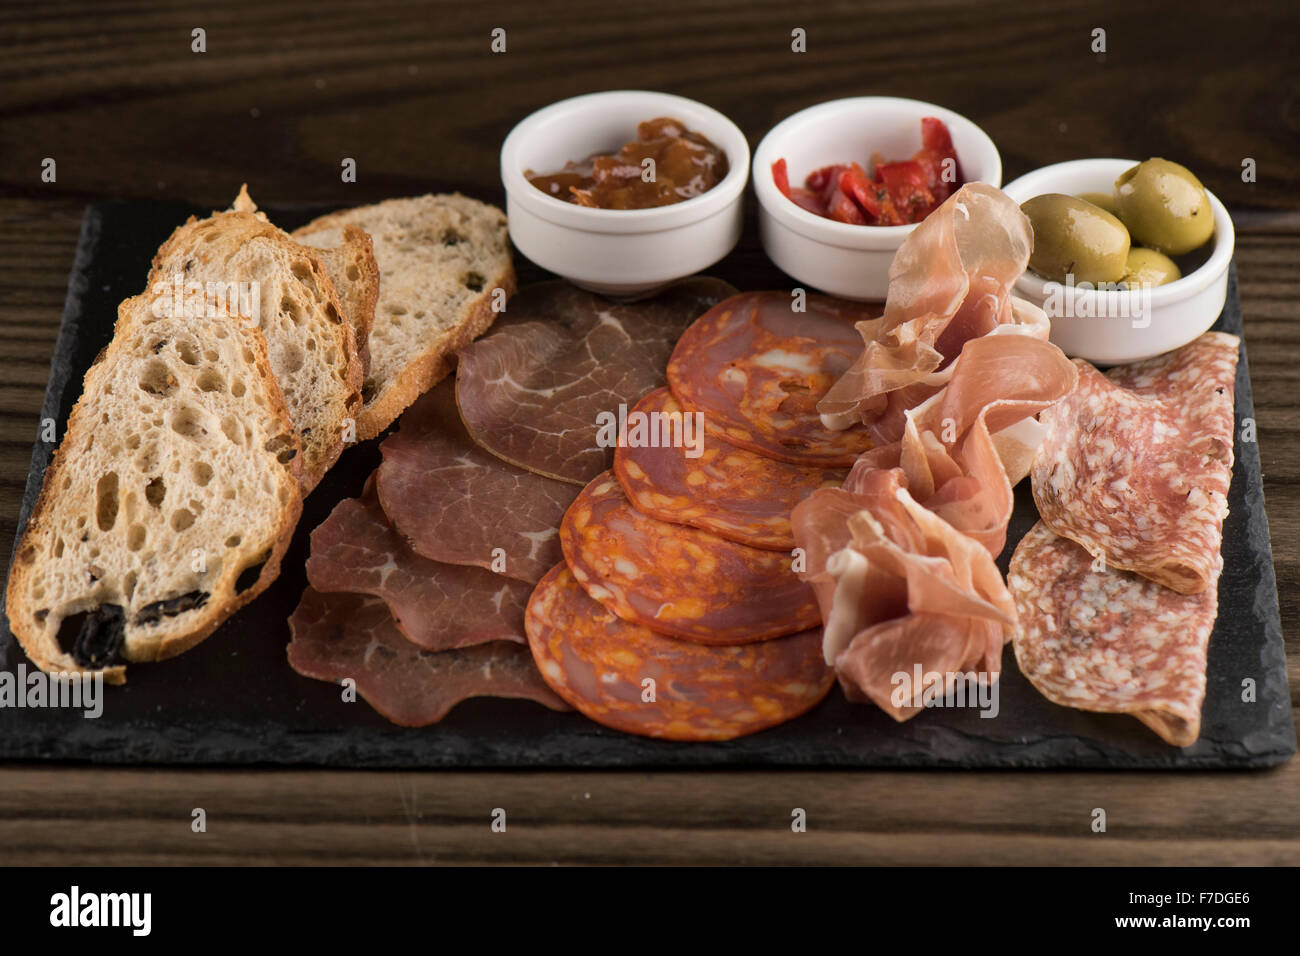 Italian cured meats with chutney, olives and chili served as a starter in a Italian restaurant. Stock Photo